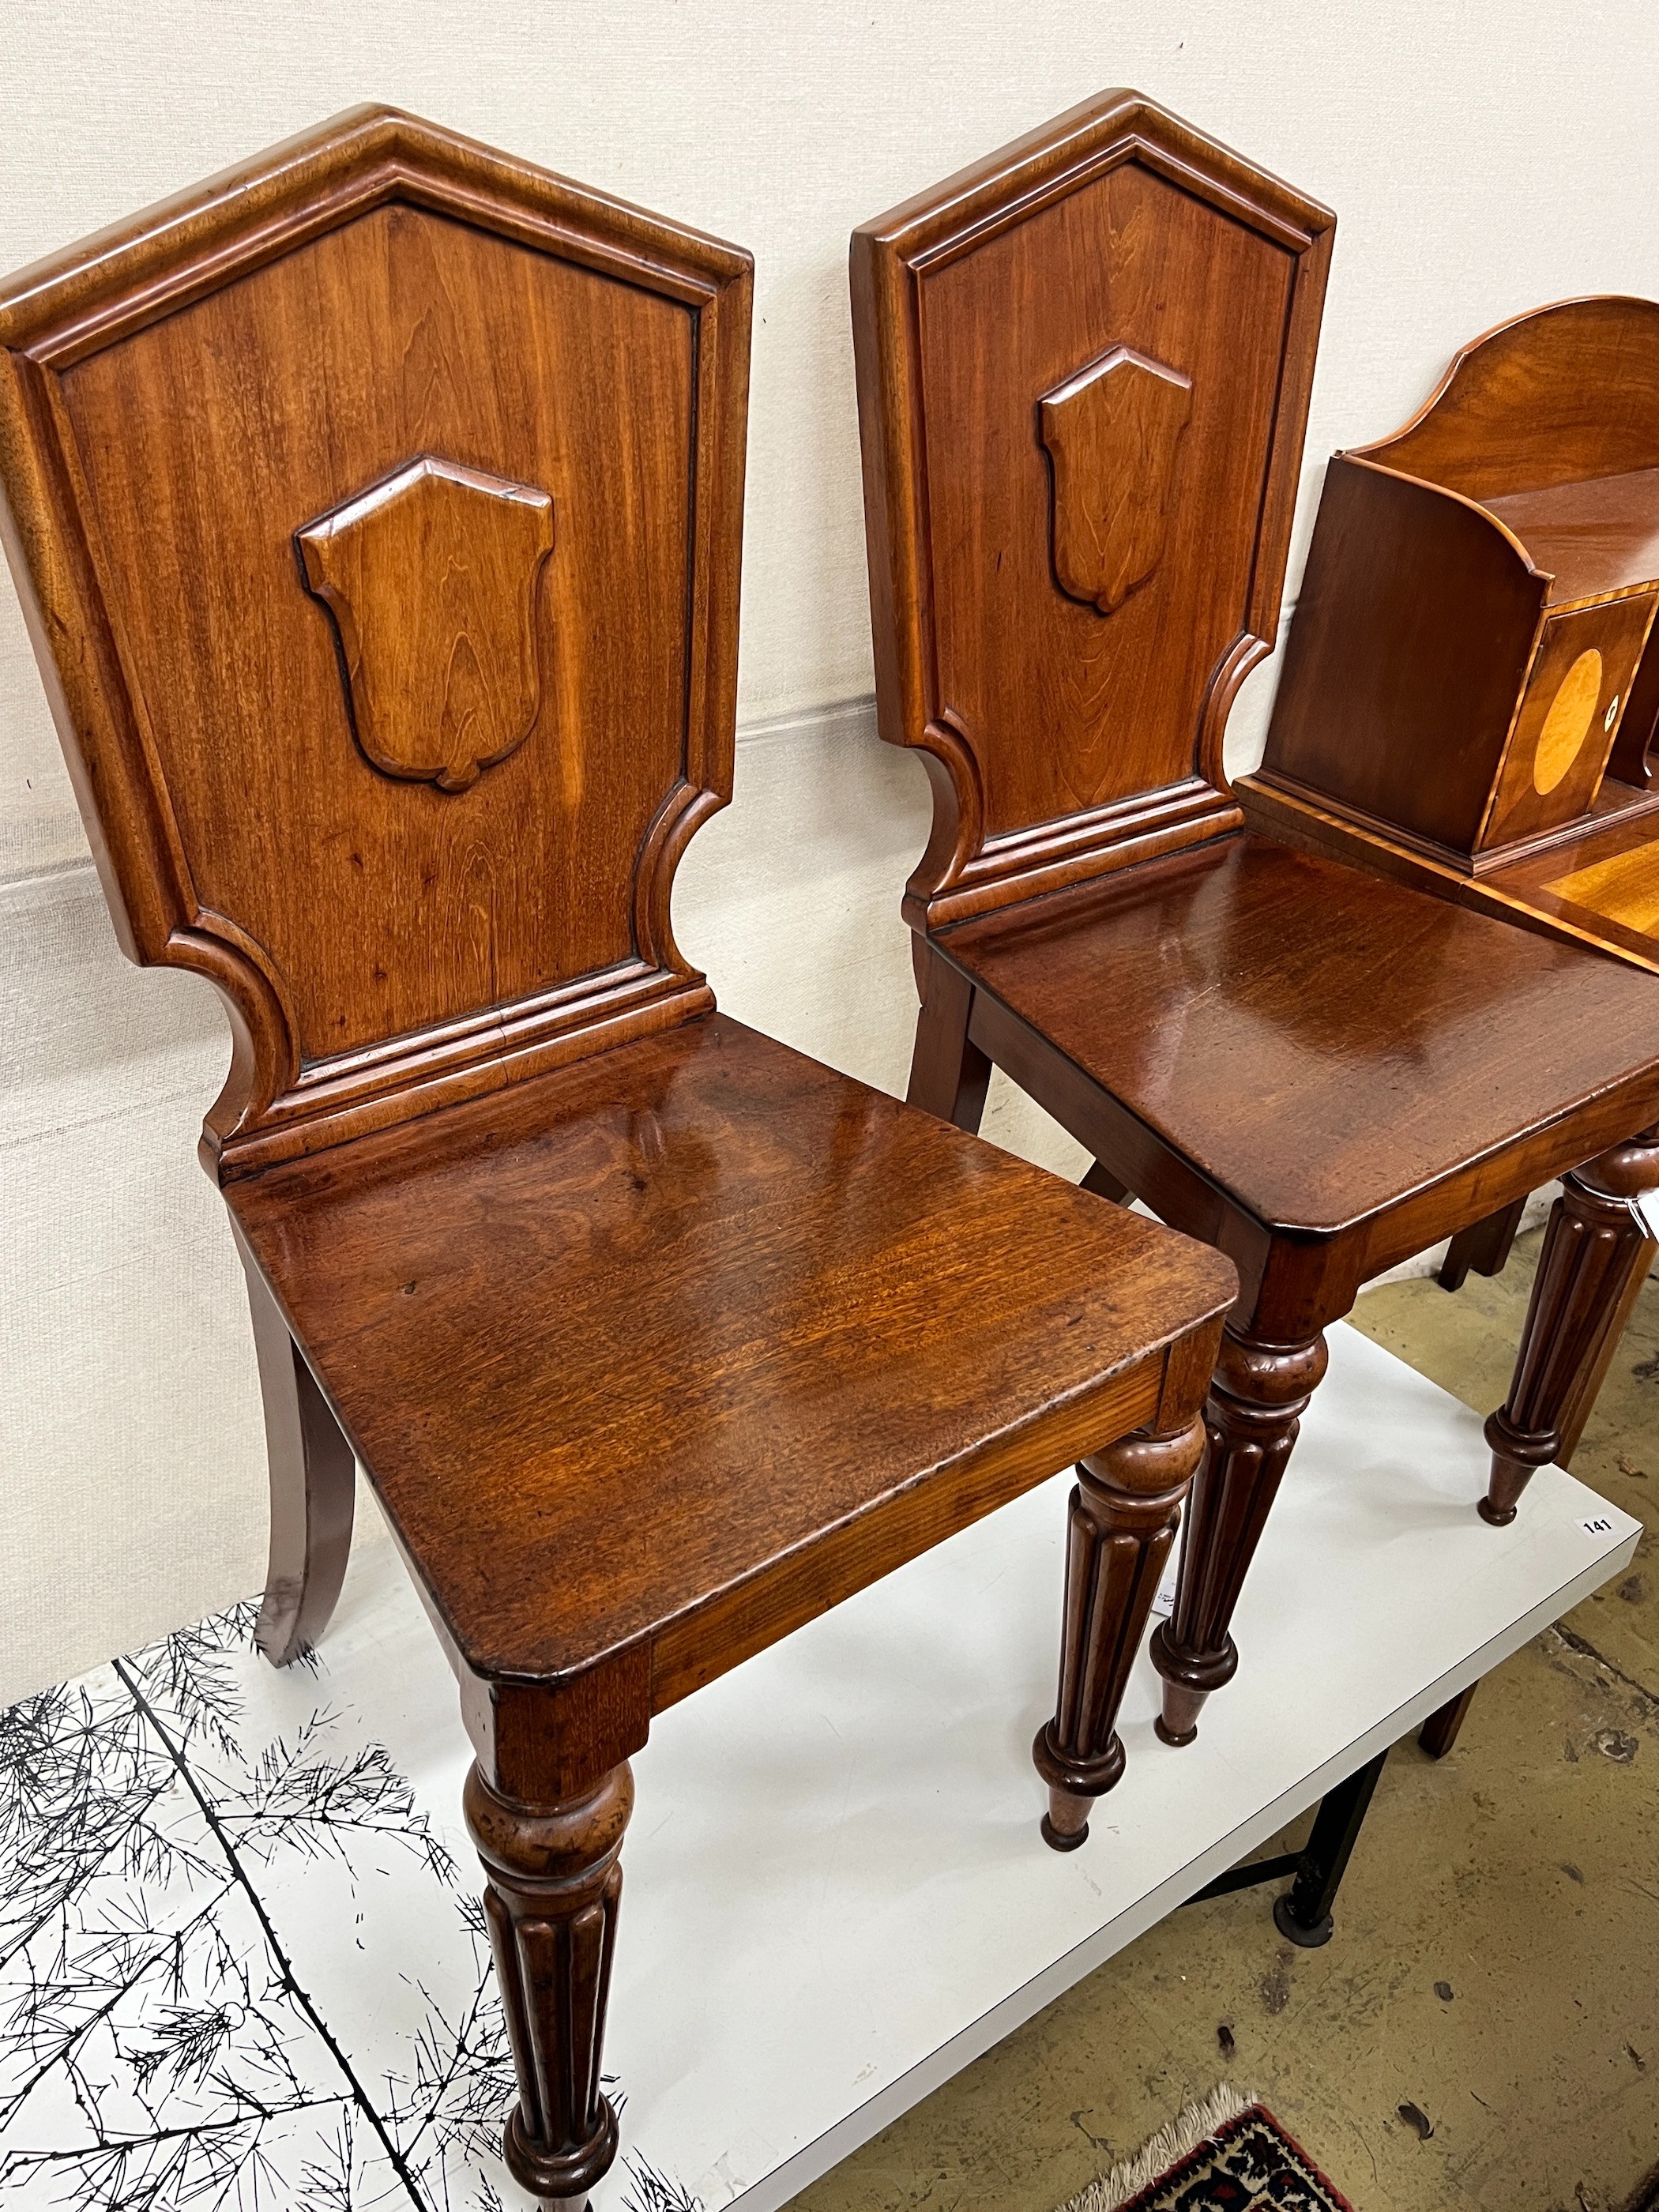 A pair of Victorian mahogany hall chairs                                                                                                                                                                                    